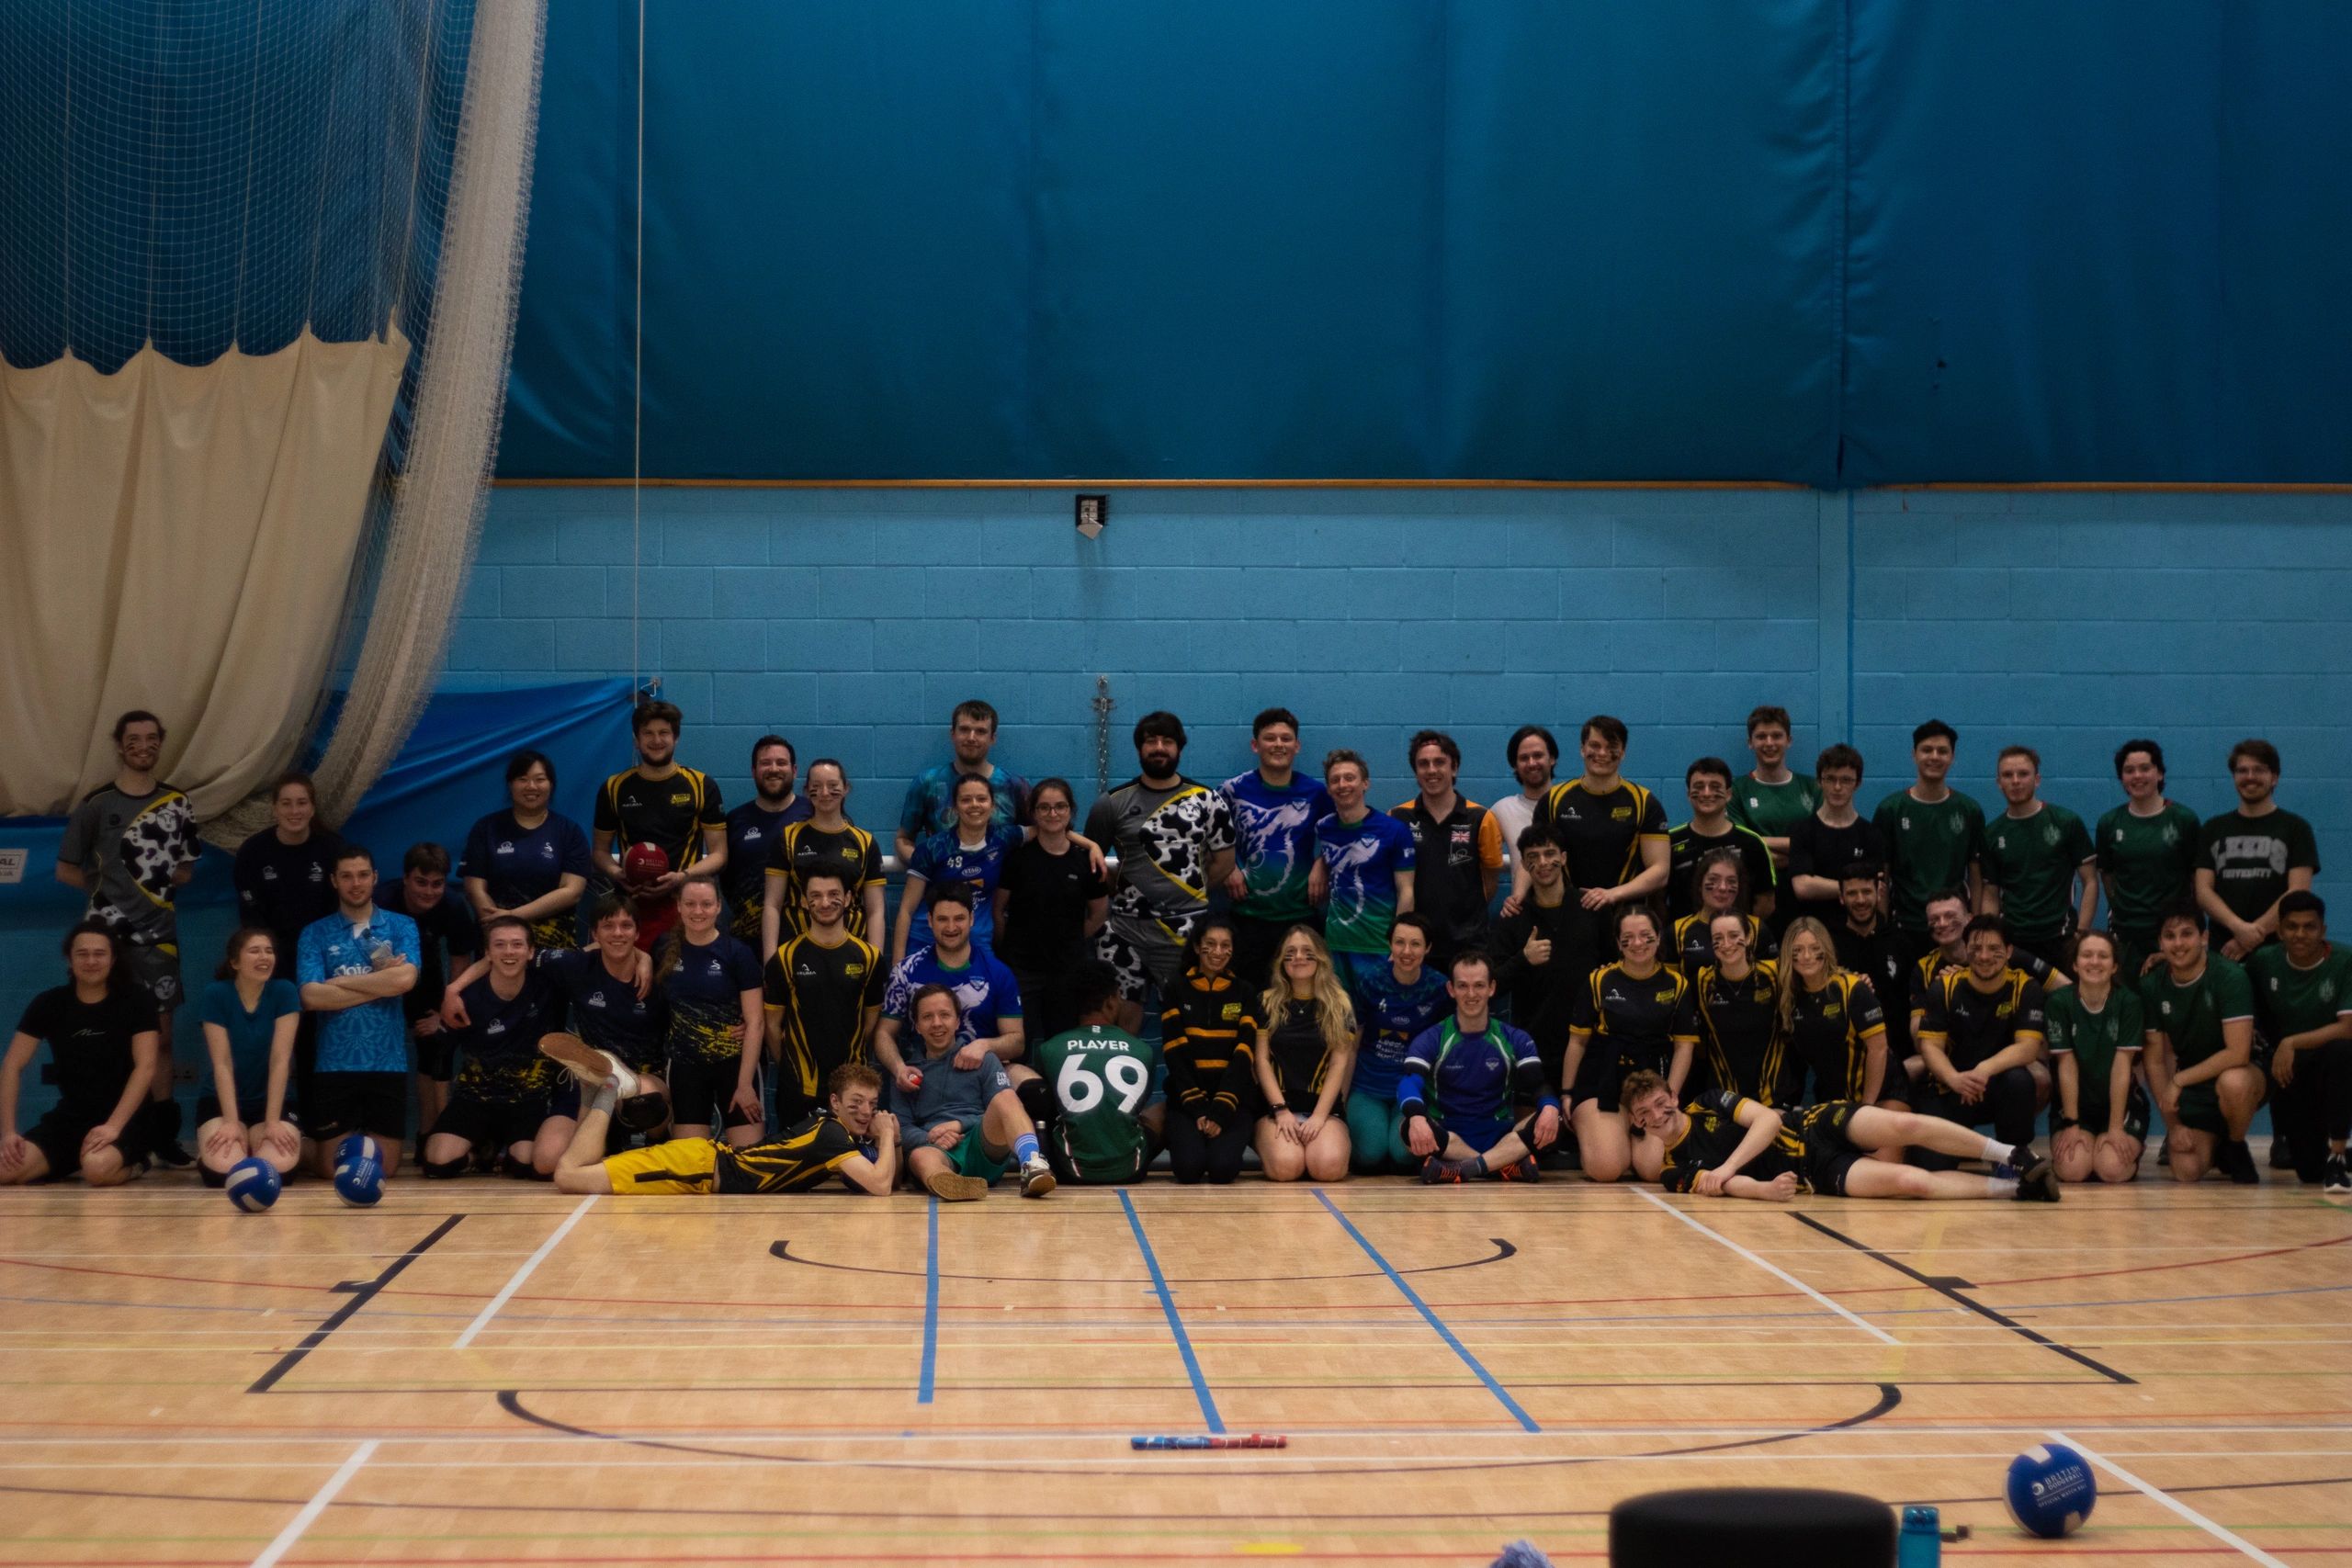 A group photo of all the players involved in Leeds Dodgefest 2023.